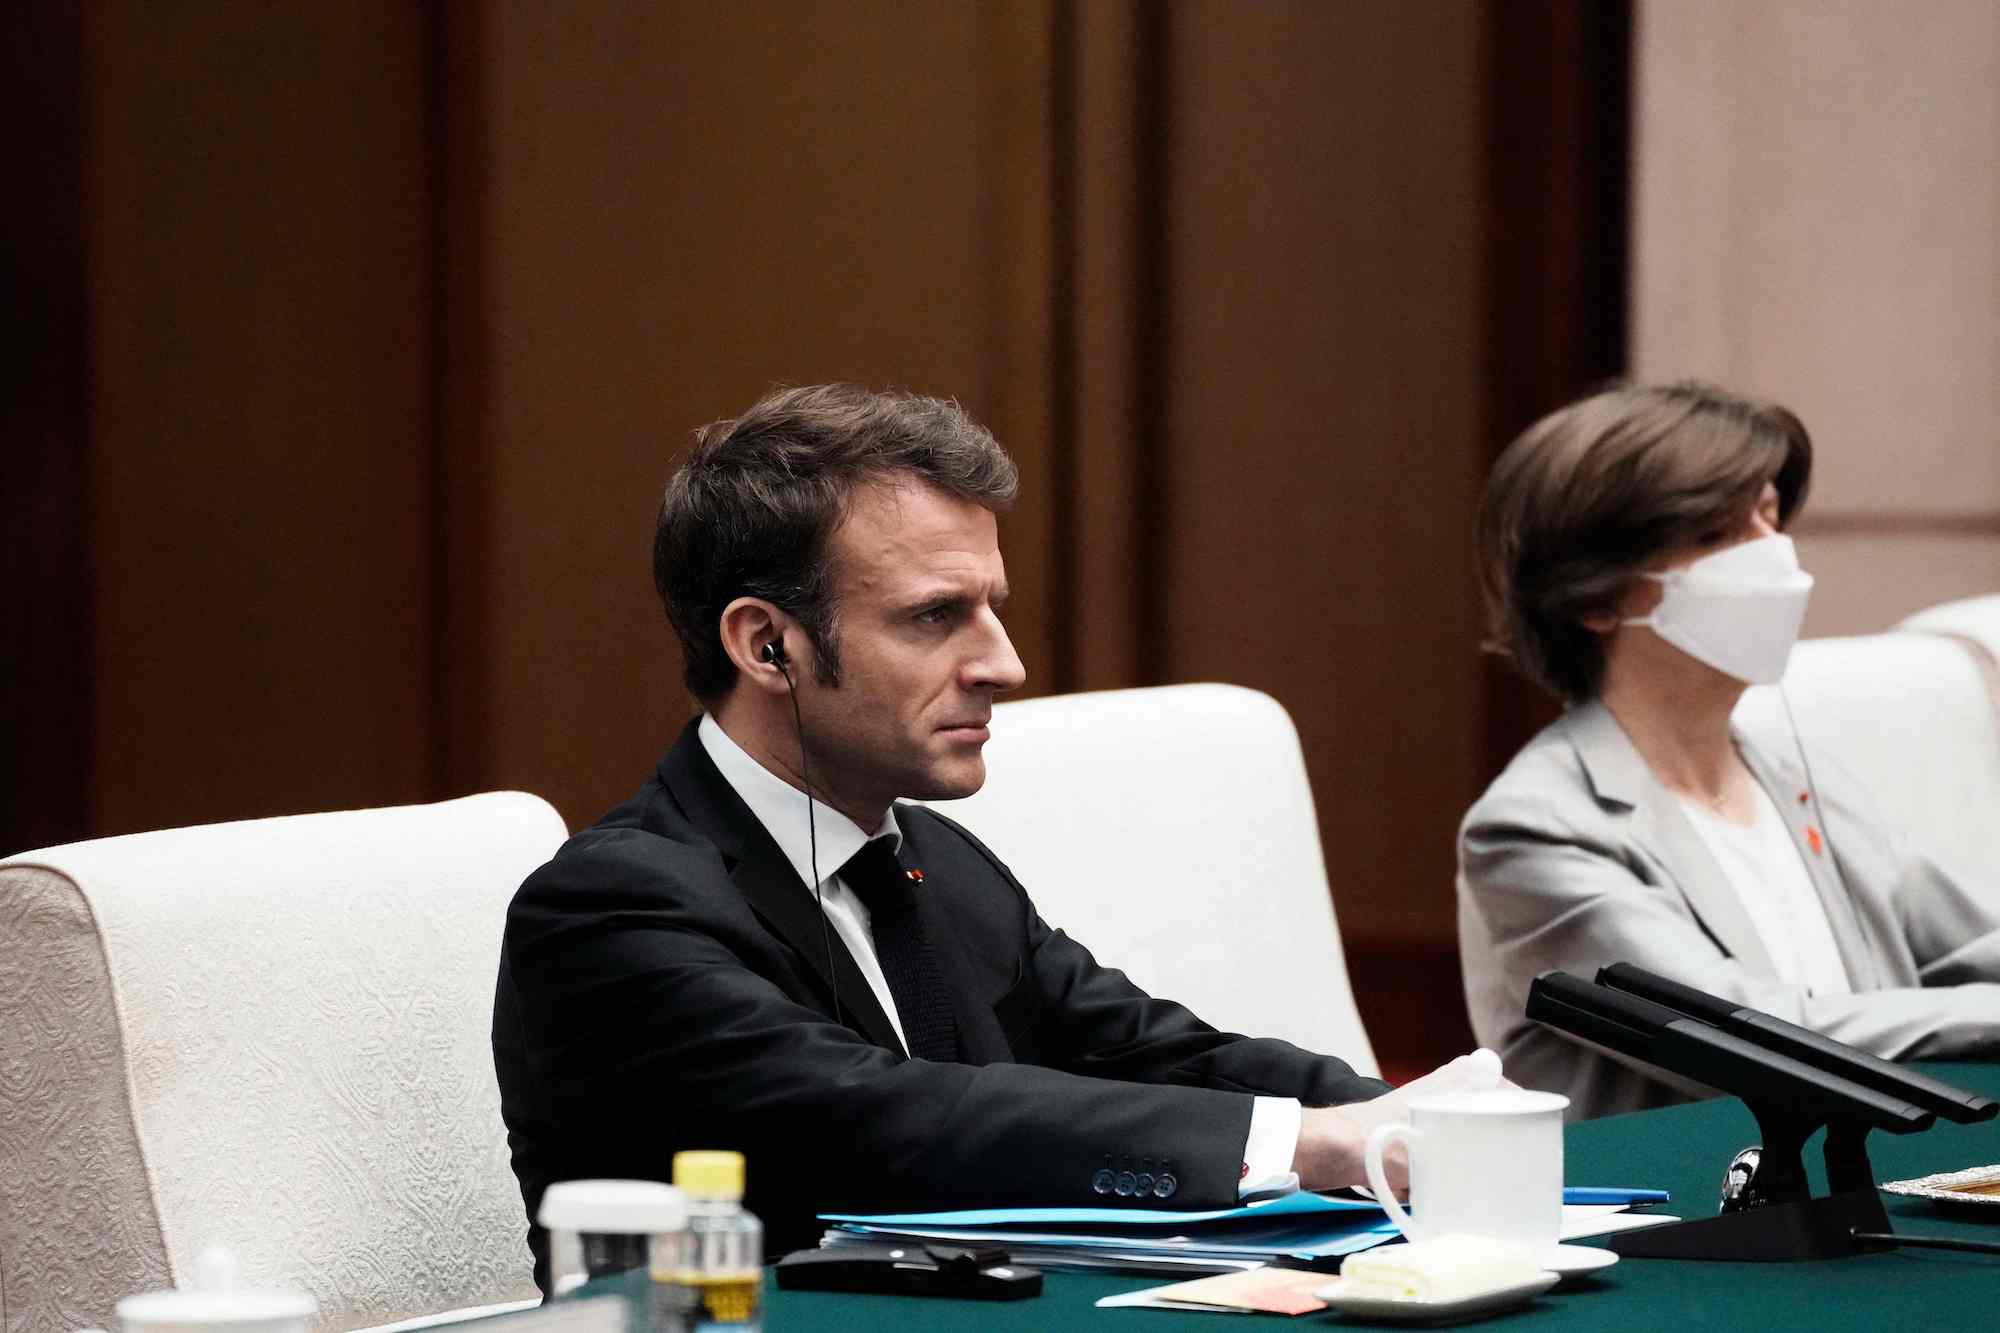 French President Emmanuel Macron attends a meeting at the Great Hall of the People in Beijing on Thursday.